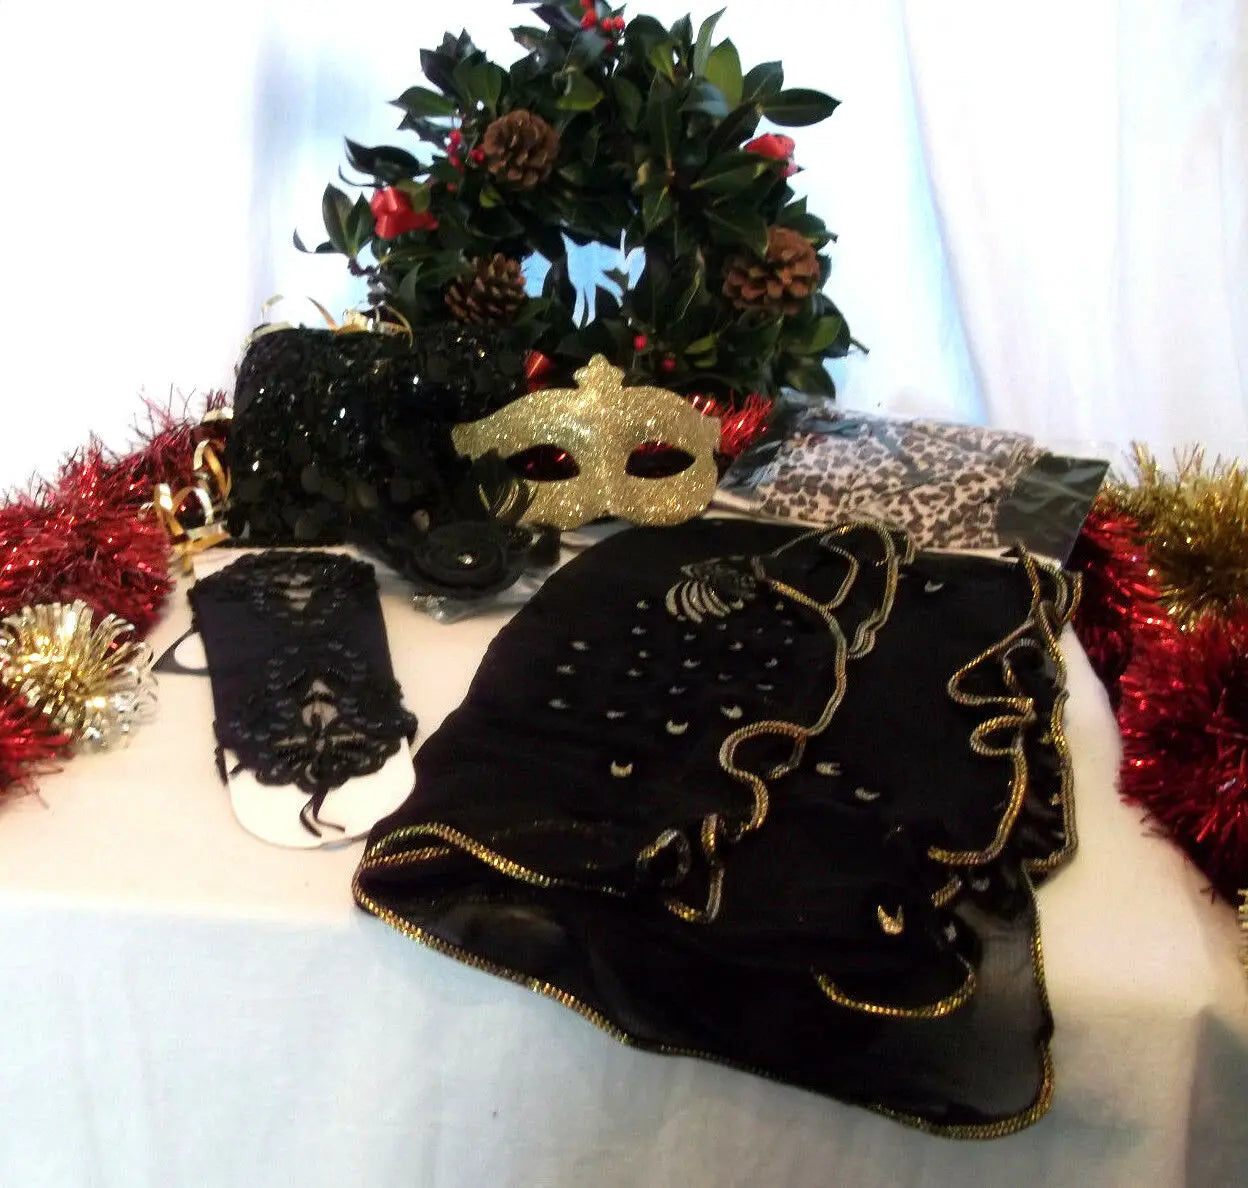 NEW YEAR/XMAS/PARTY/ACCESSORIES party pack essential GIFT SET8--gift wrapped WonkeyDonkeyBazaar